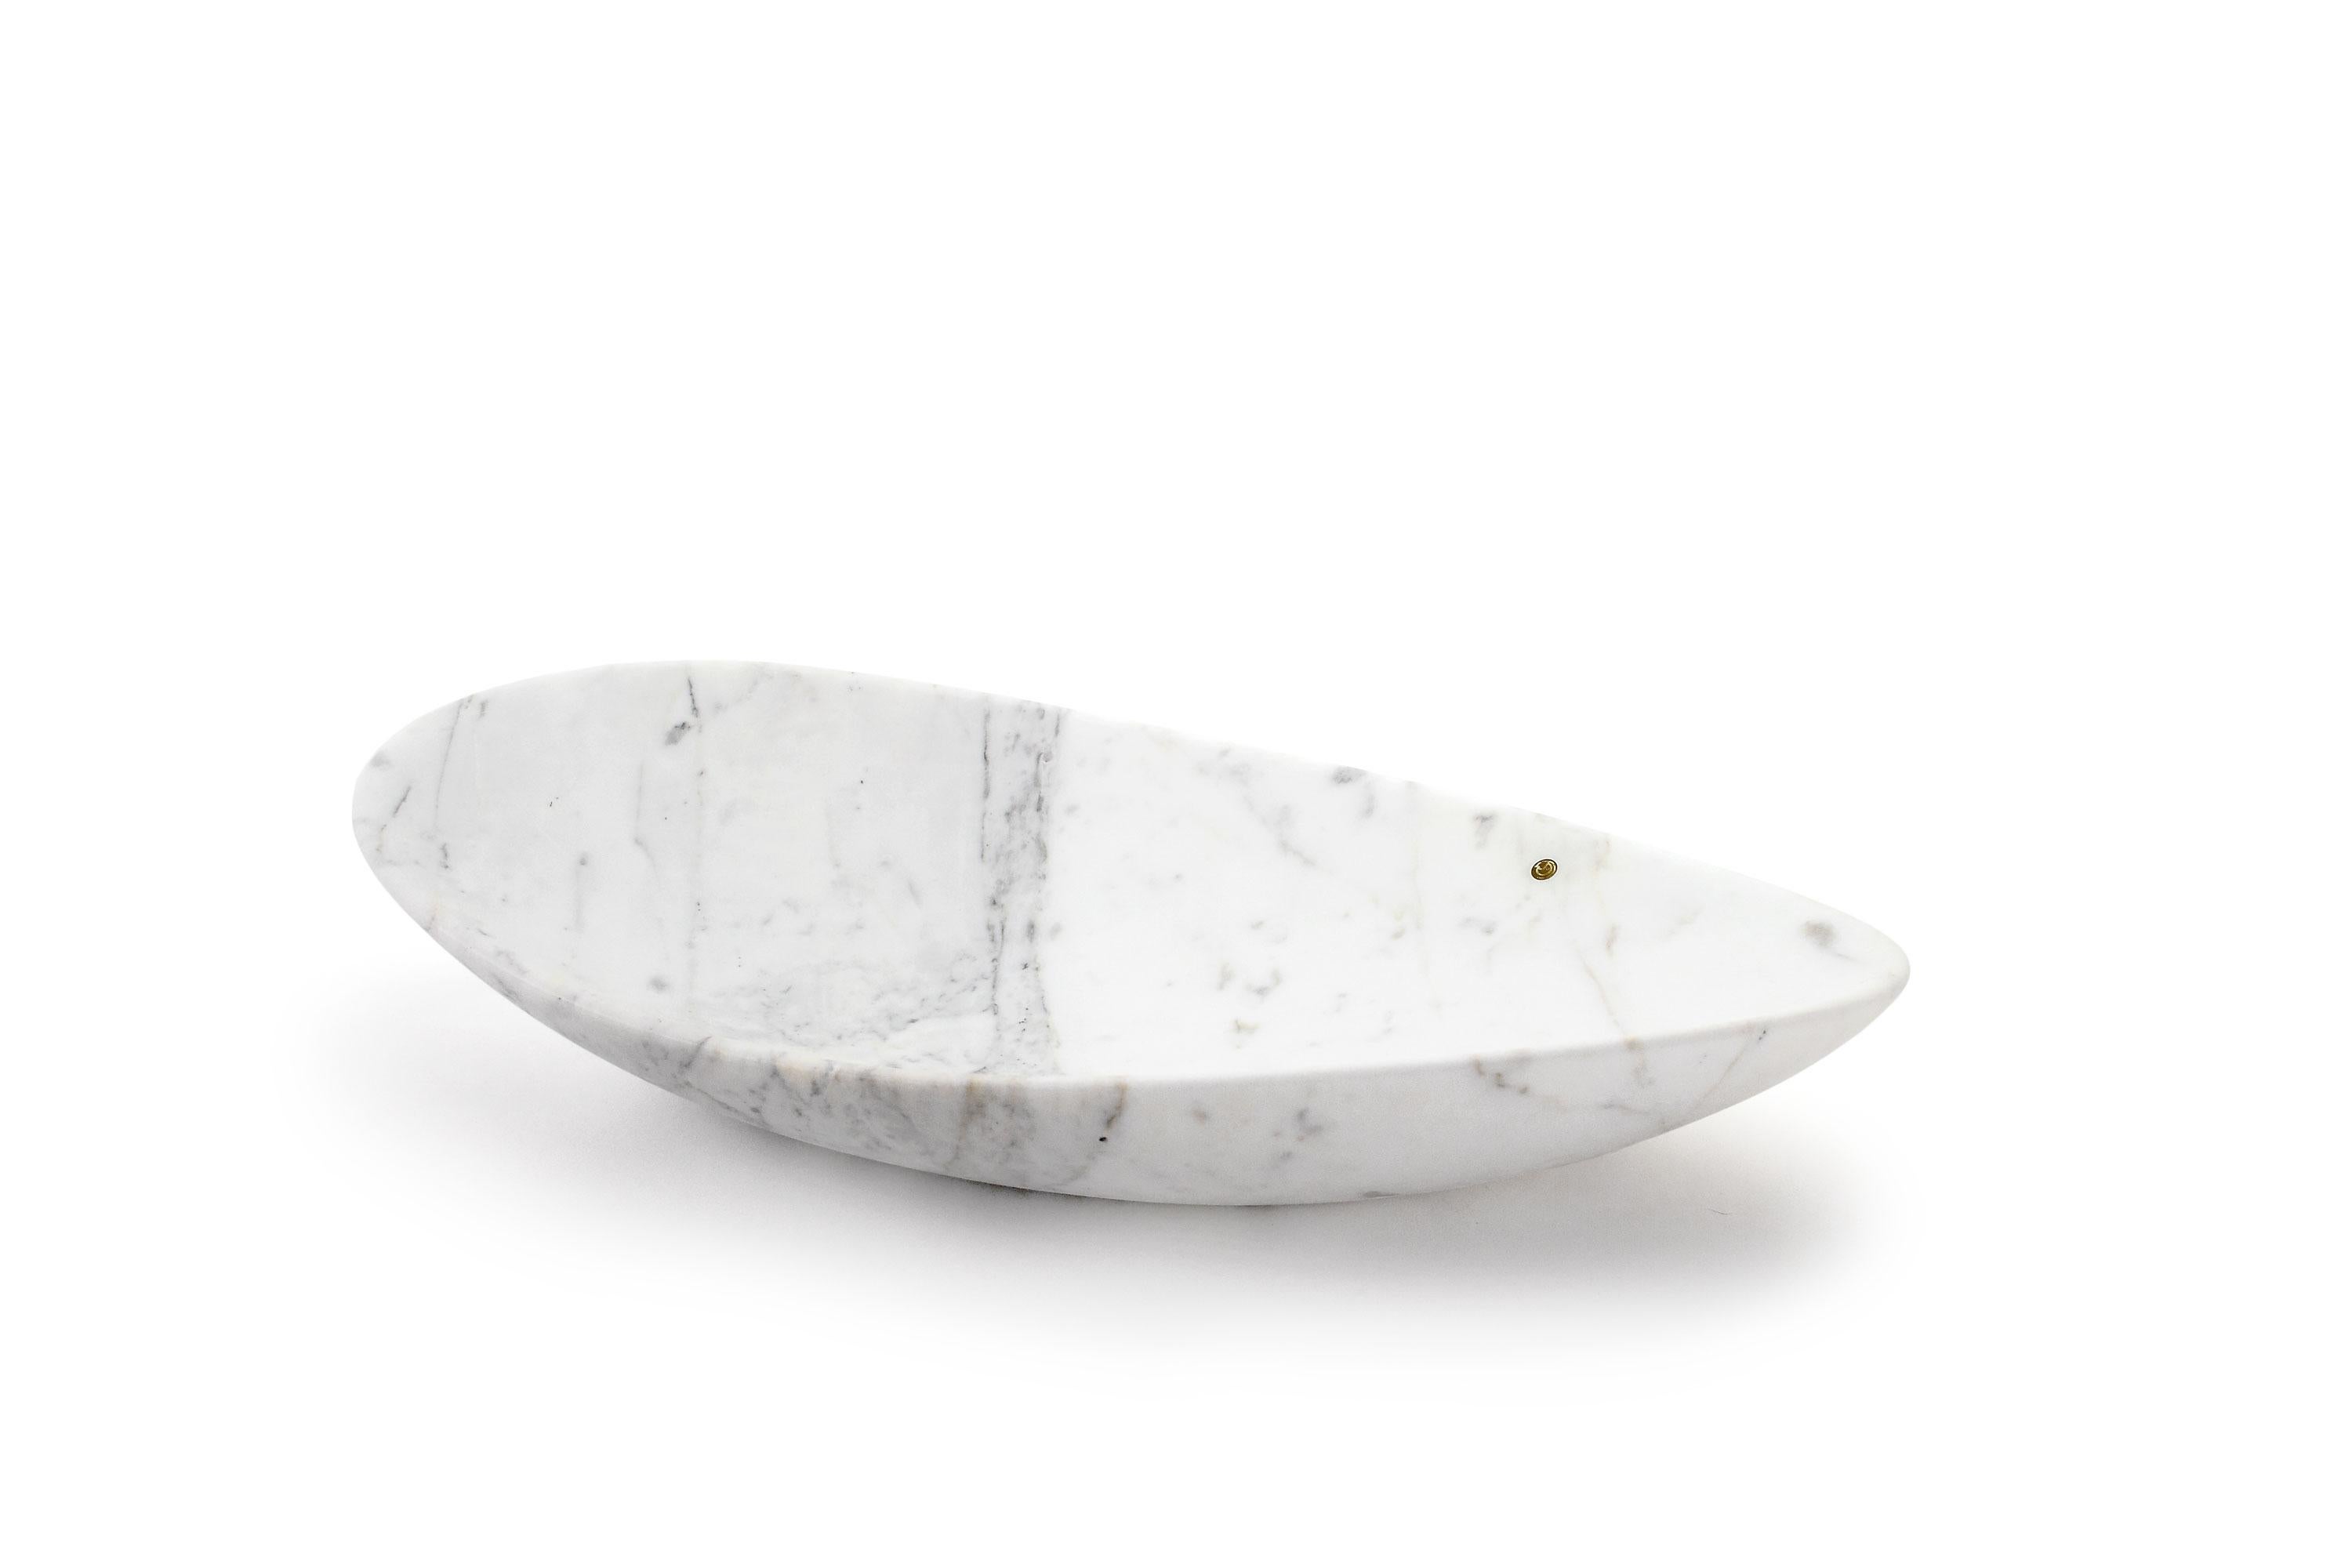 Bowl sculpted by hand from a solid block of Calacatta marble. Velvet finishing. 

Dimensions: Medium L 45 x W 22 x H 10 cm. 
Also available in Big L 56, W 27, H 12 cm. Small L 35, W 17, H 8 cm.
Available in different marbles, onyx and quartzite.